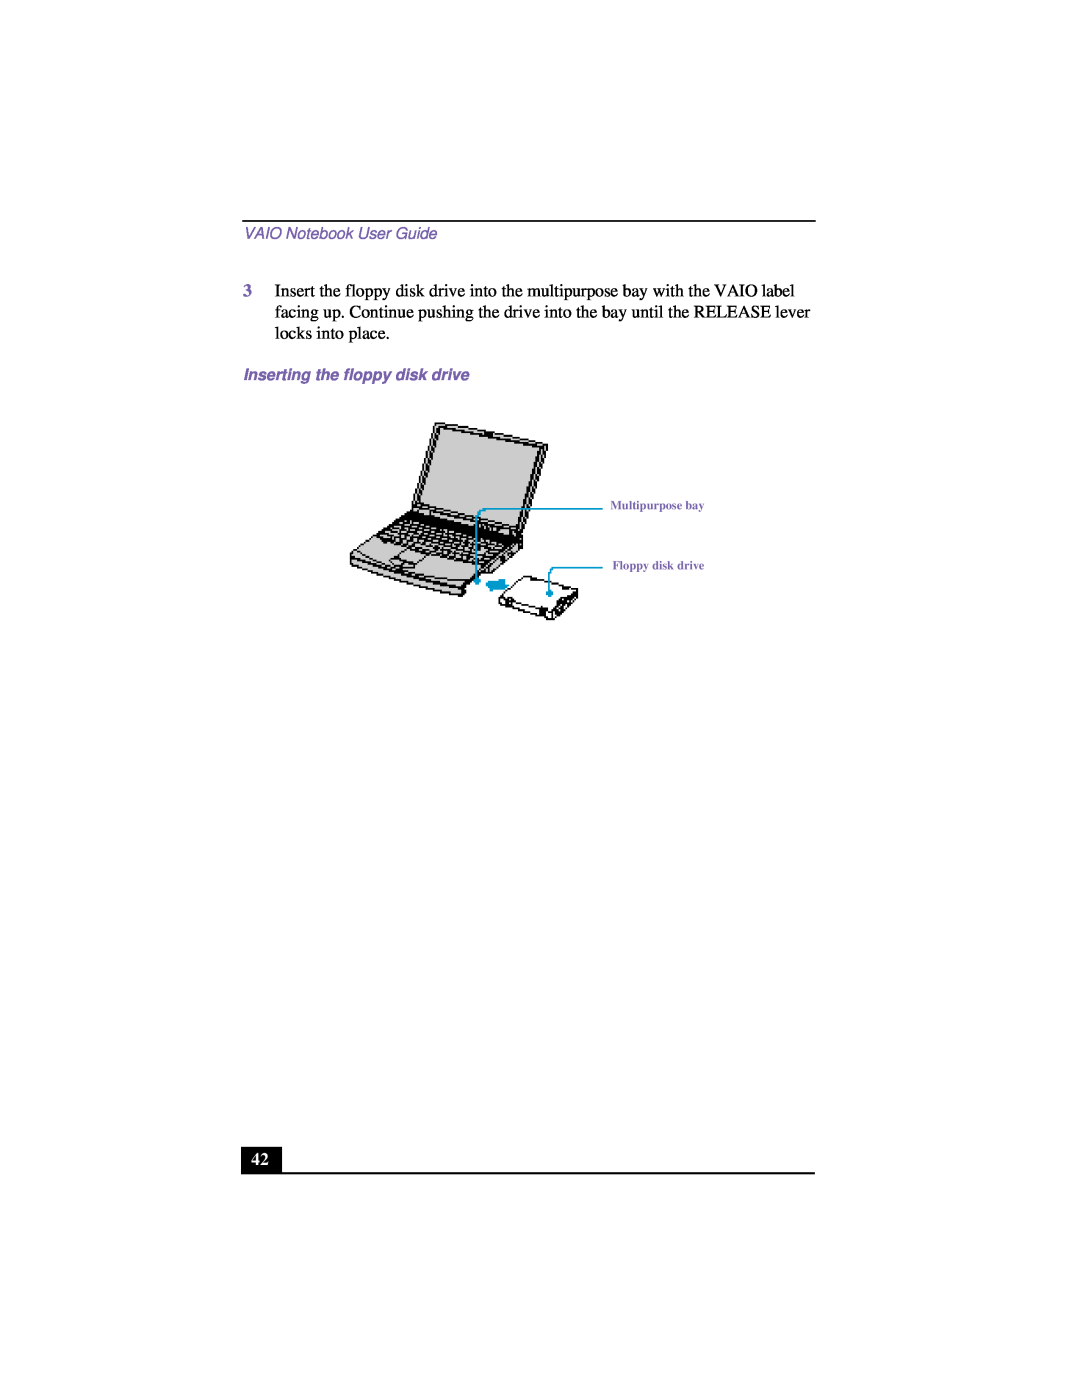 Sony PCG-FX120 manual VAIO Notebook User Guide, Inserting the floppy disk drive, Multipurpose bay Floppy disk drive 